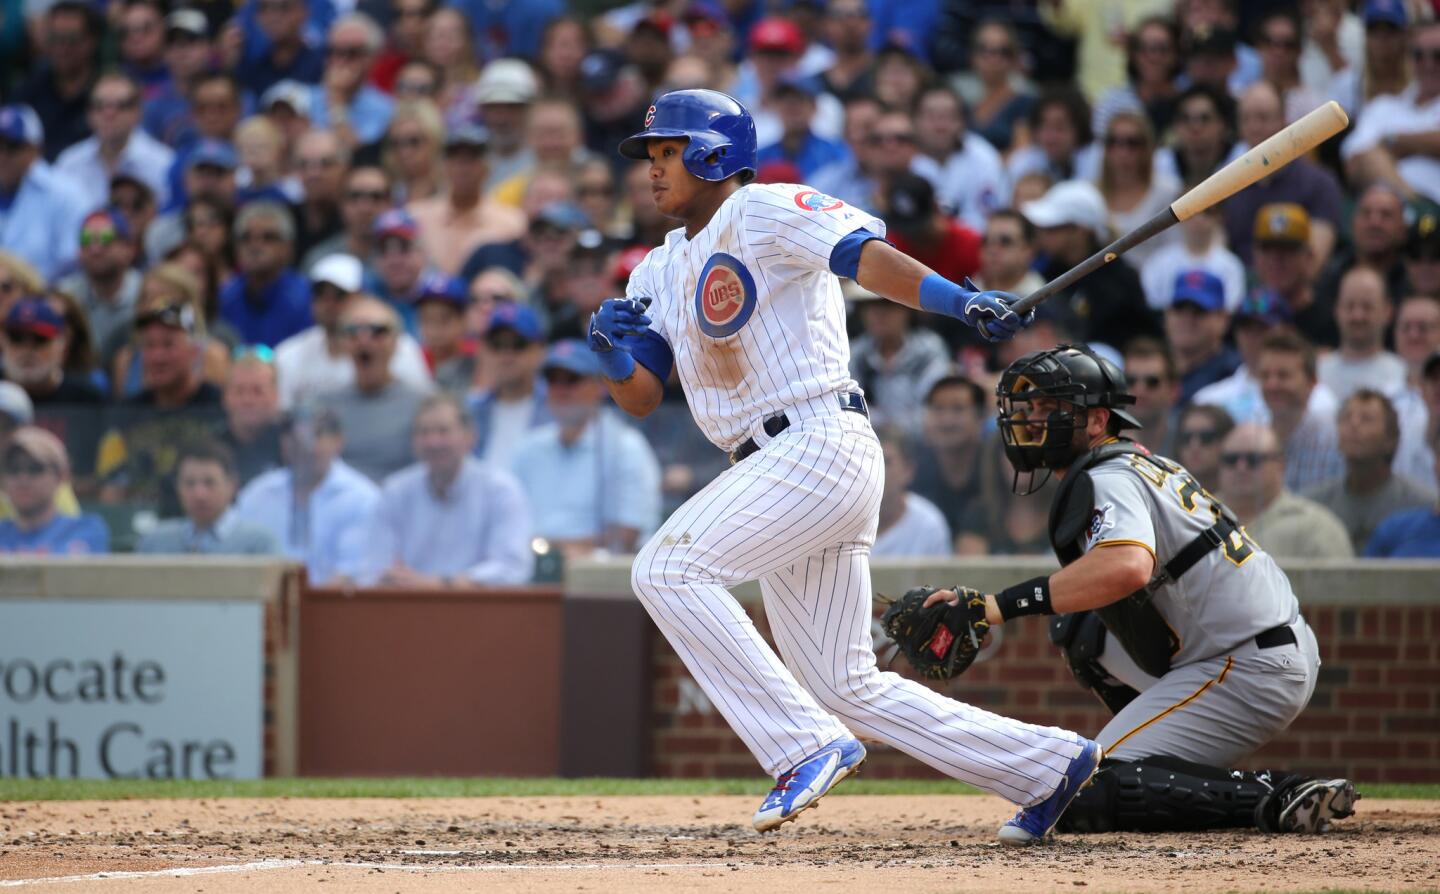 Cubs batter Addison Russell hits into a fielder's choice in the fourth inning. Kris Bryant scored on the play.